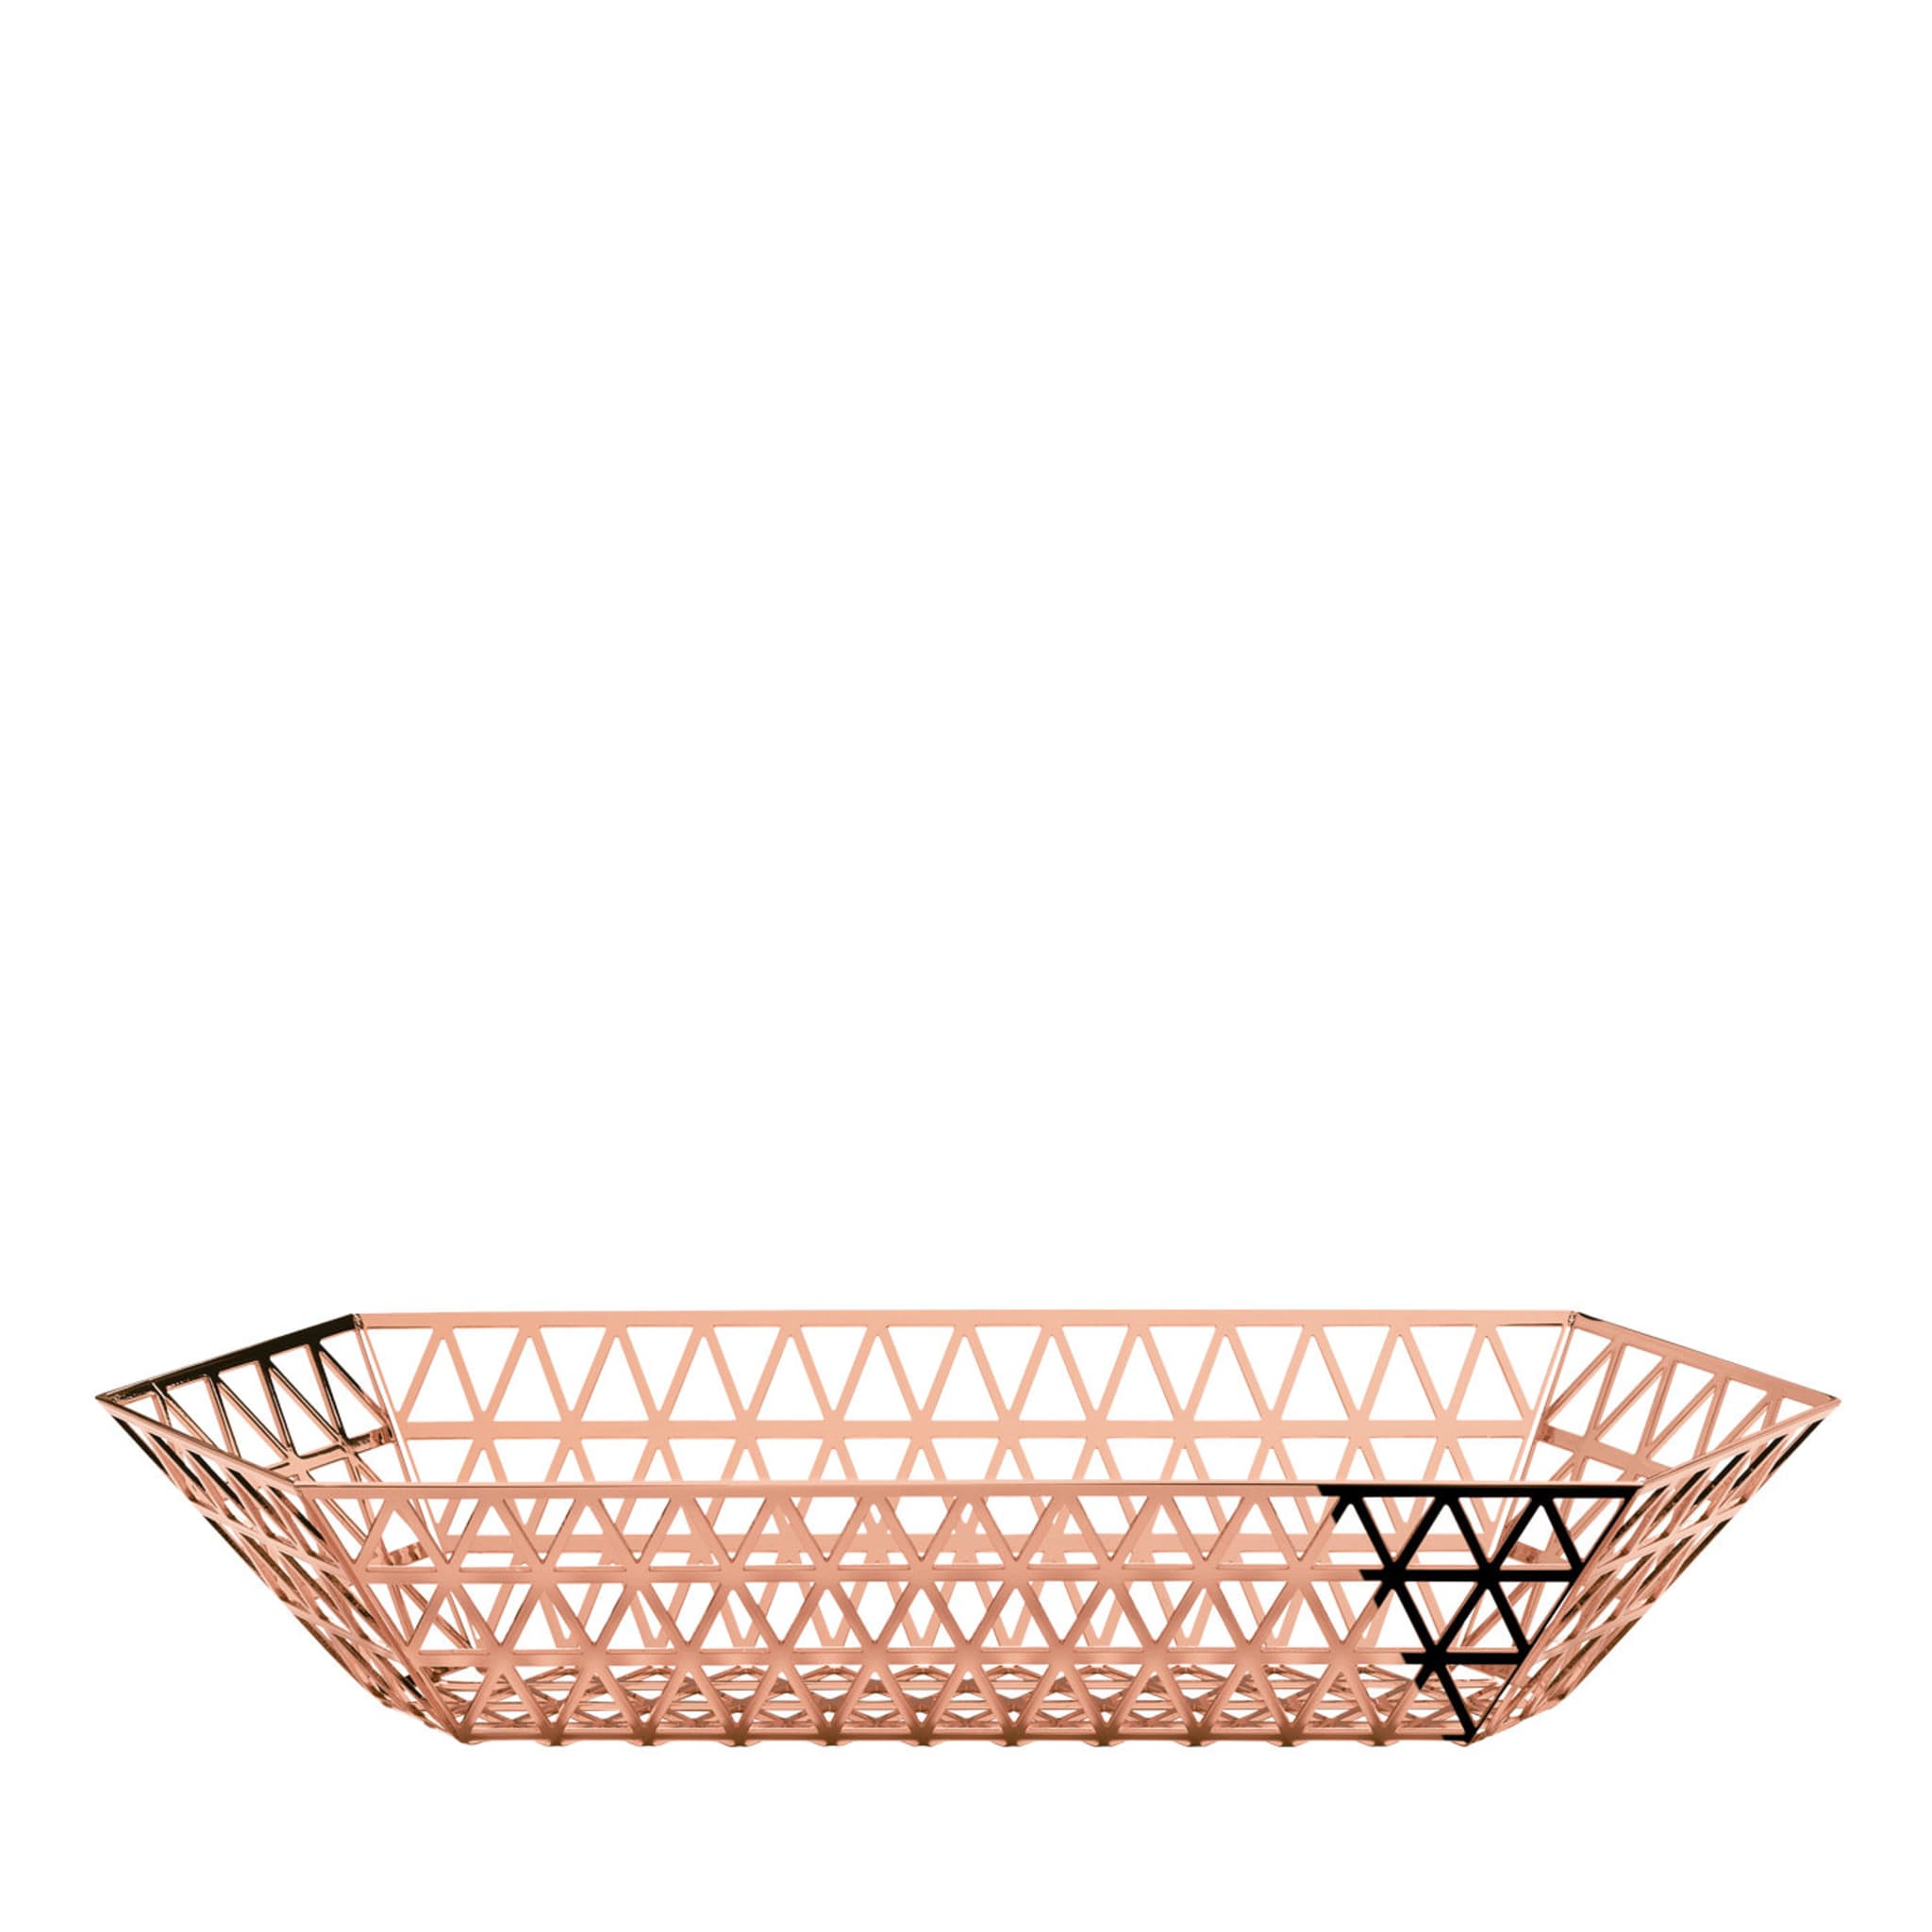 Limousine Tray in Copper Finish By Richard Hutten - Main view